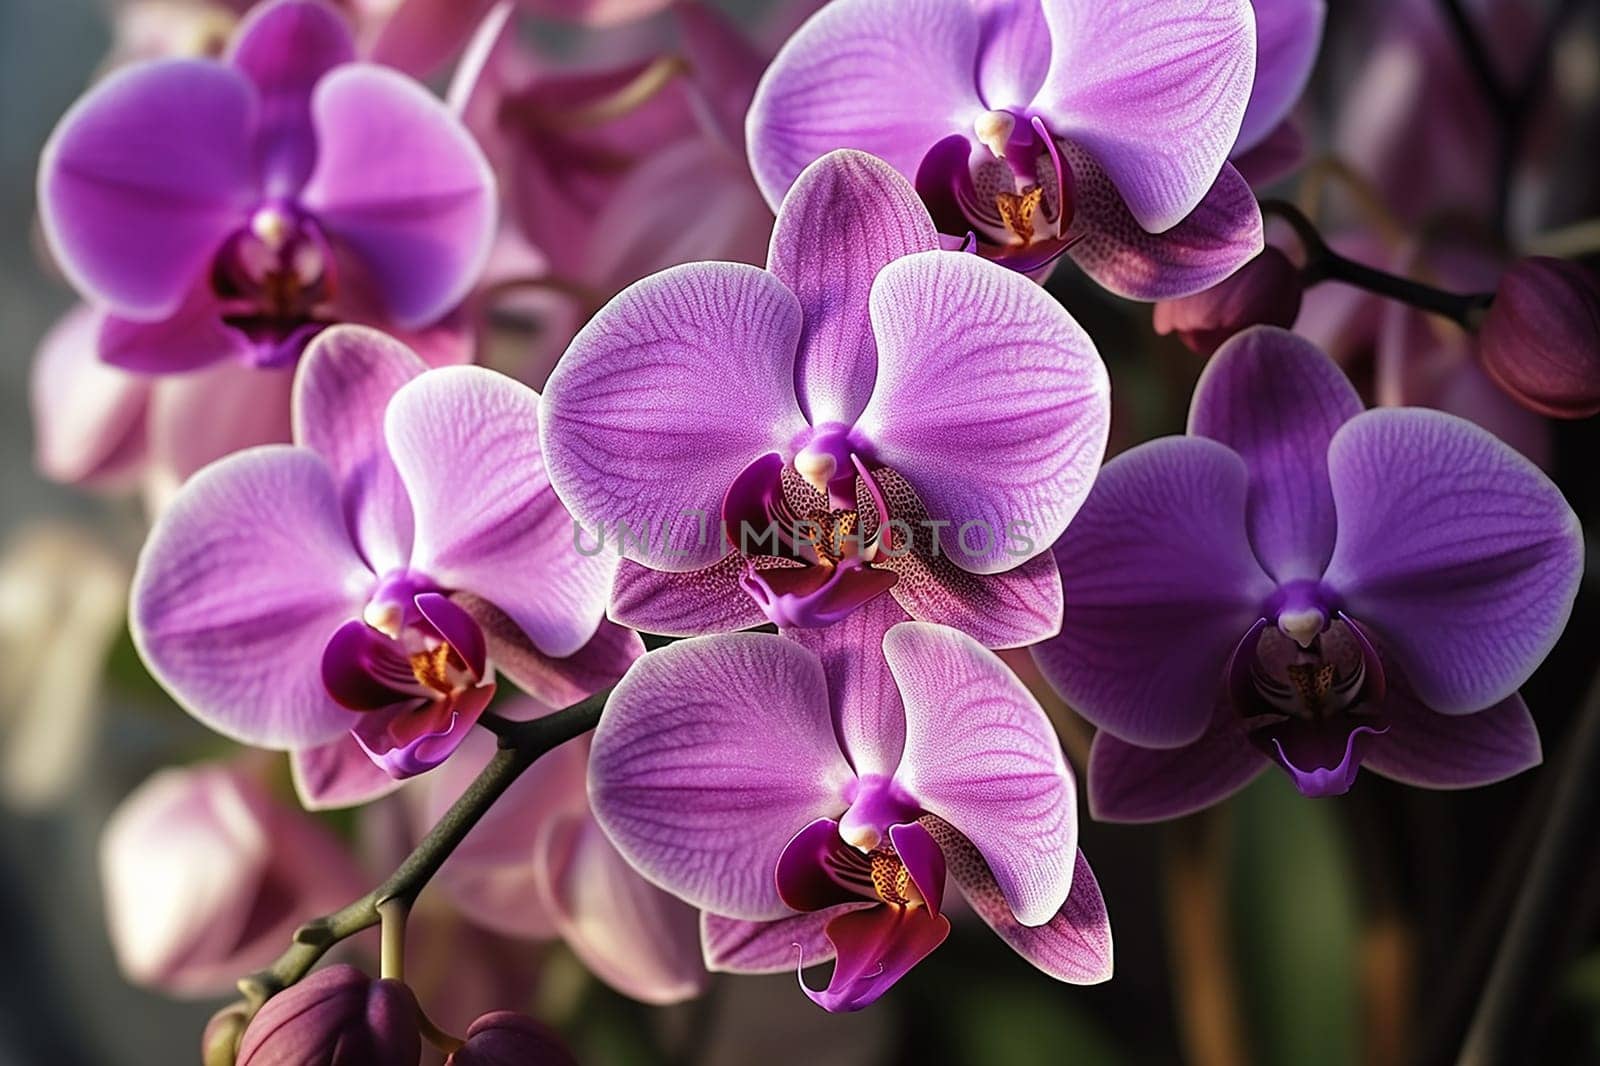 Close-up of vibrant purple orchids with delicate textures.